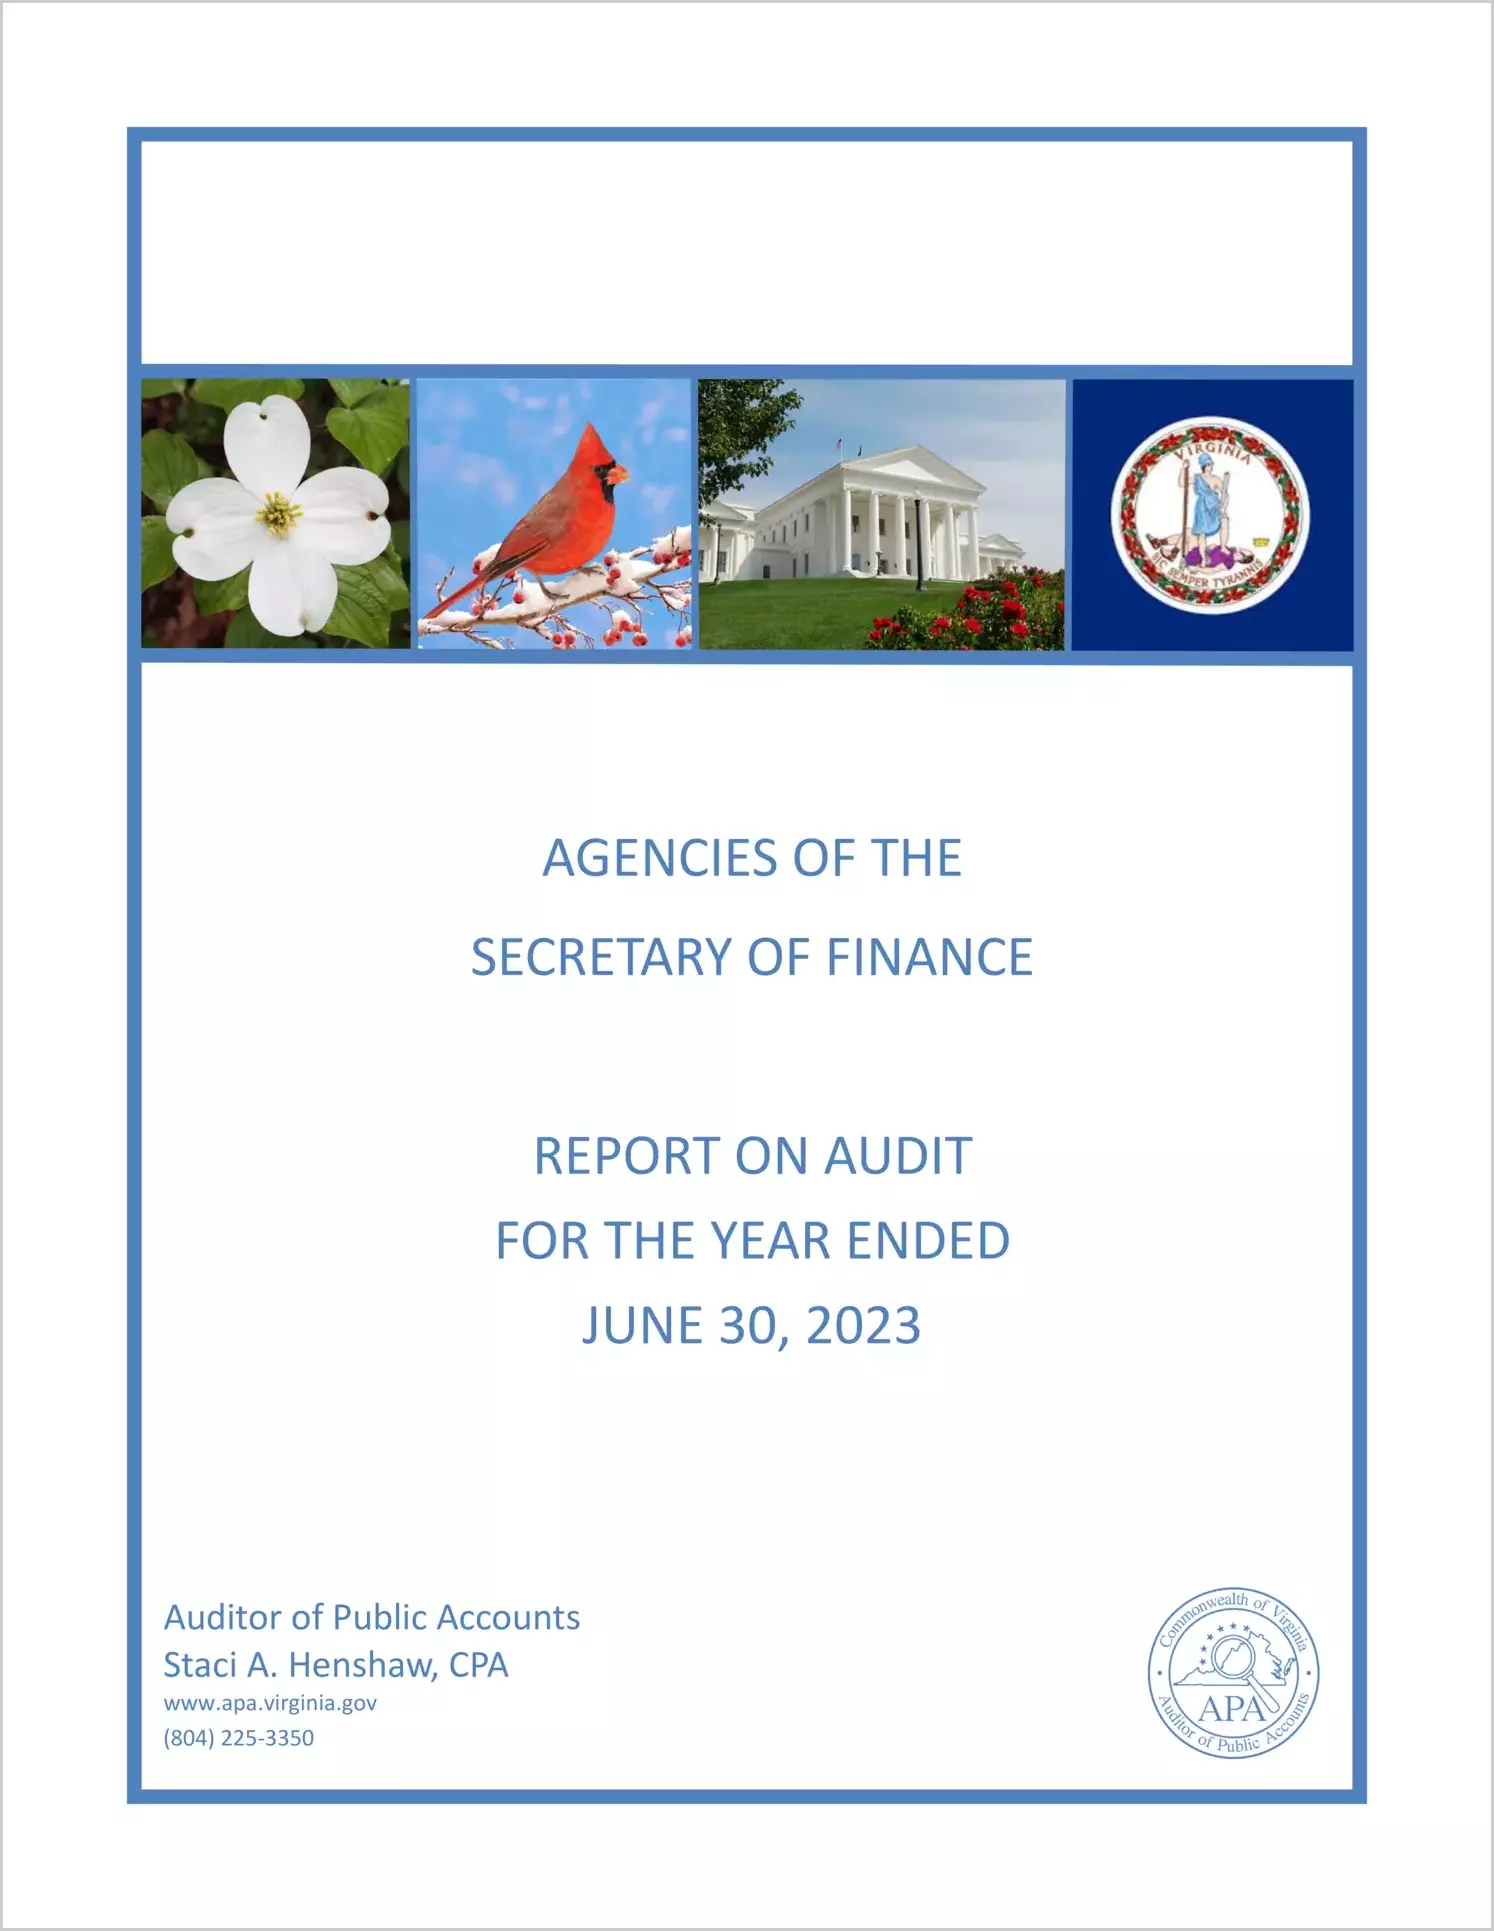 Agencies of the Secretary of Finance for the year ended June 30, 2023